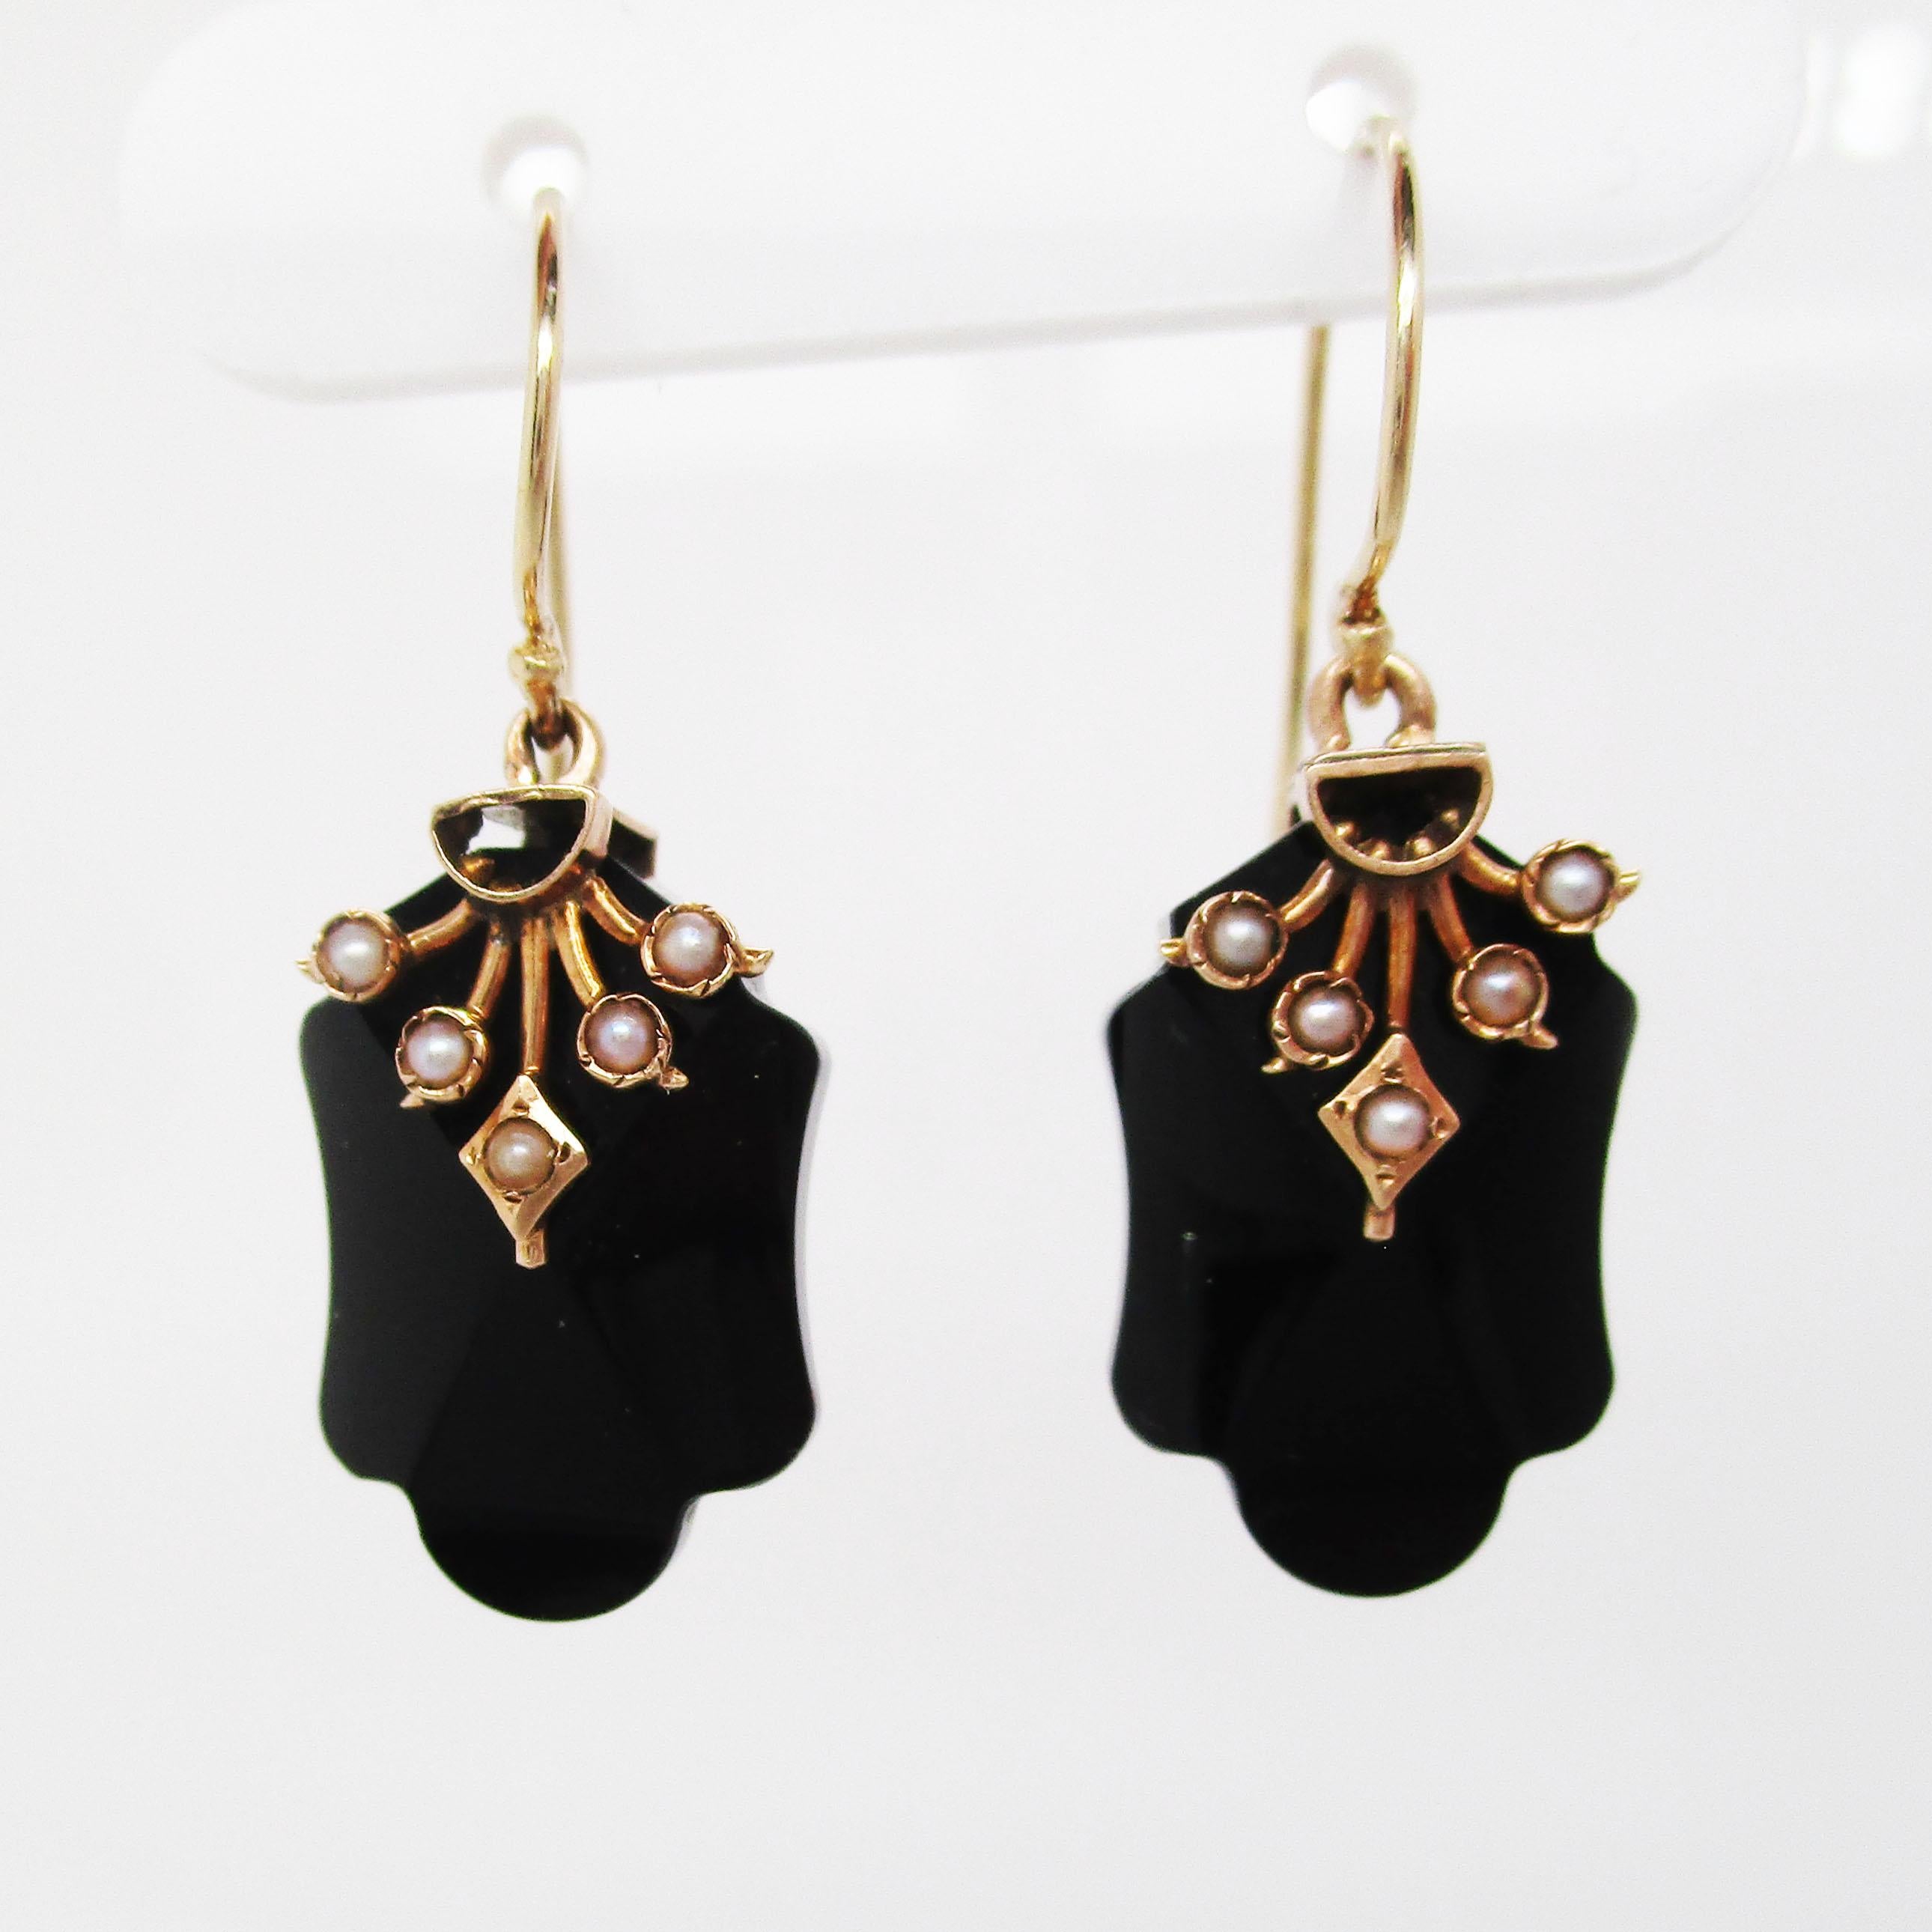 These beautiful Victorian earrings are in 14k rose gold and feature a black onyx dangle decorated with subtle, bright white seed pearl accents! These earrings have an elegant layout that is distinctly Victorian. The onyx has a curving lower end that